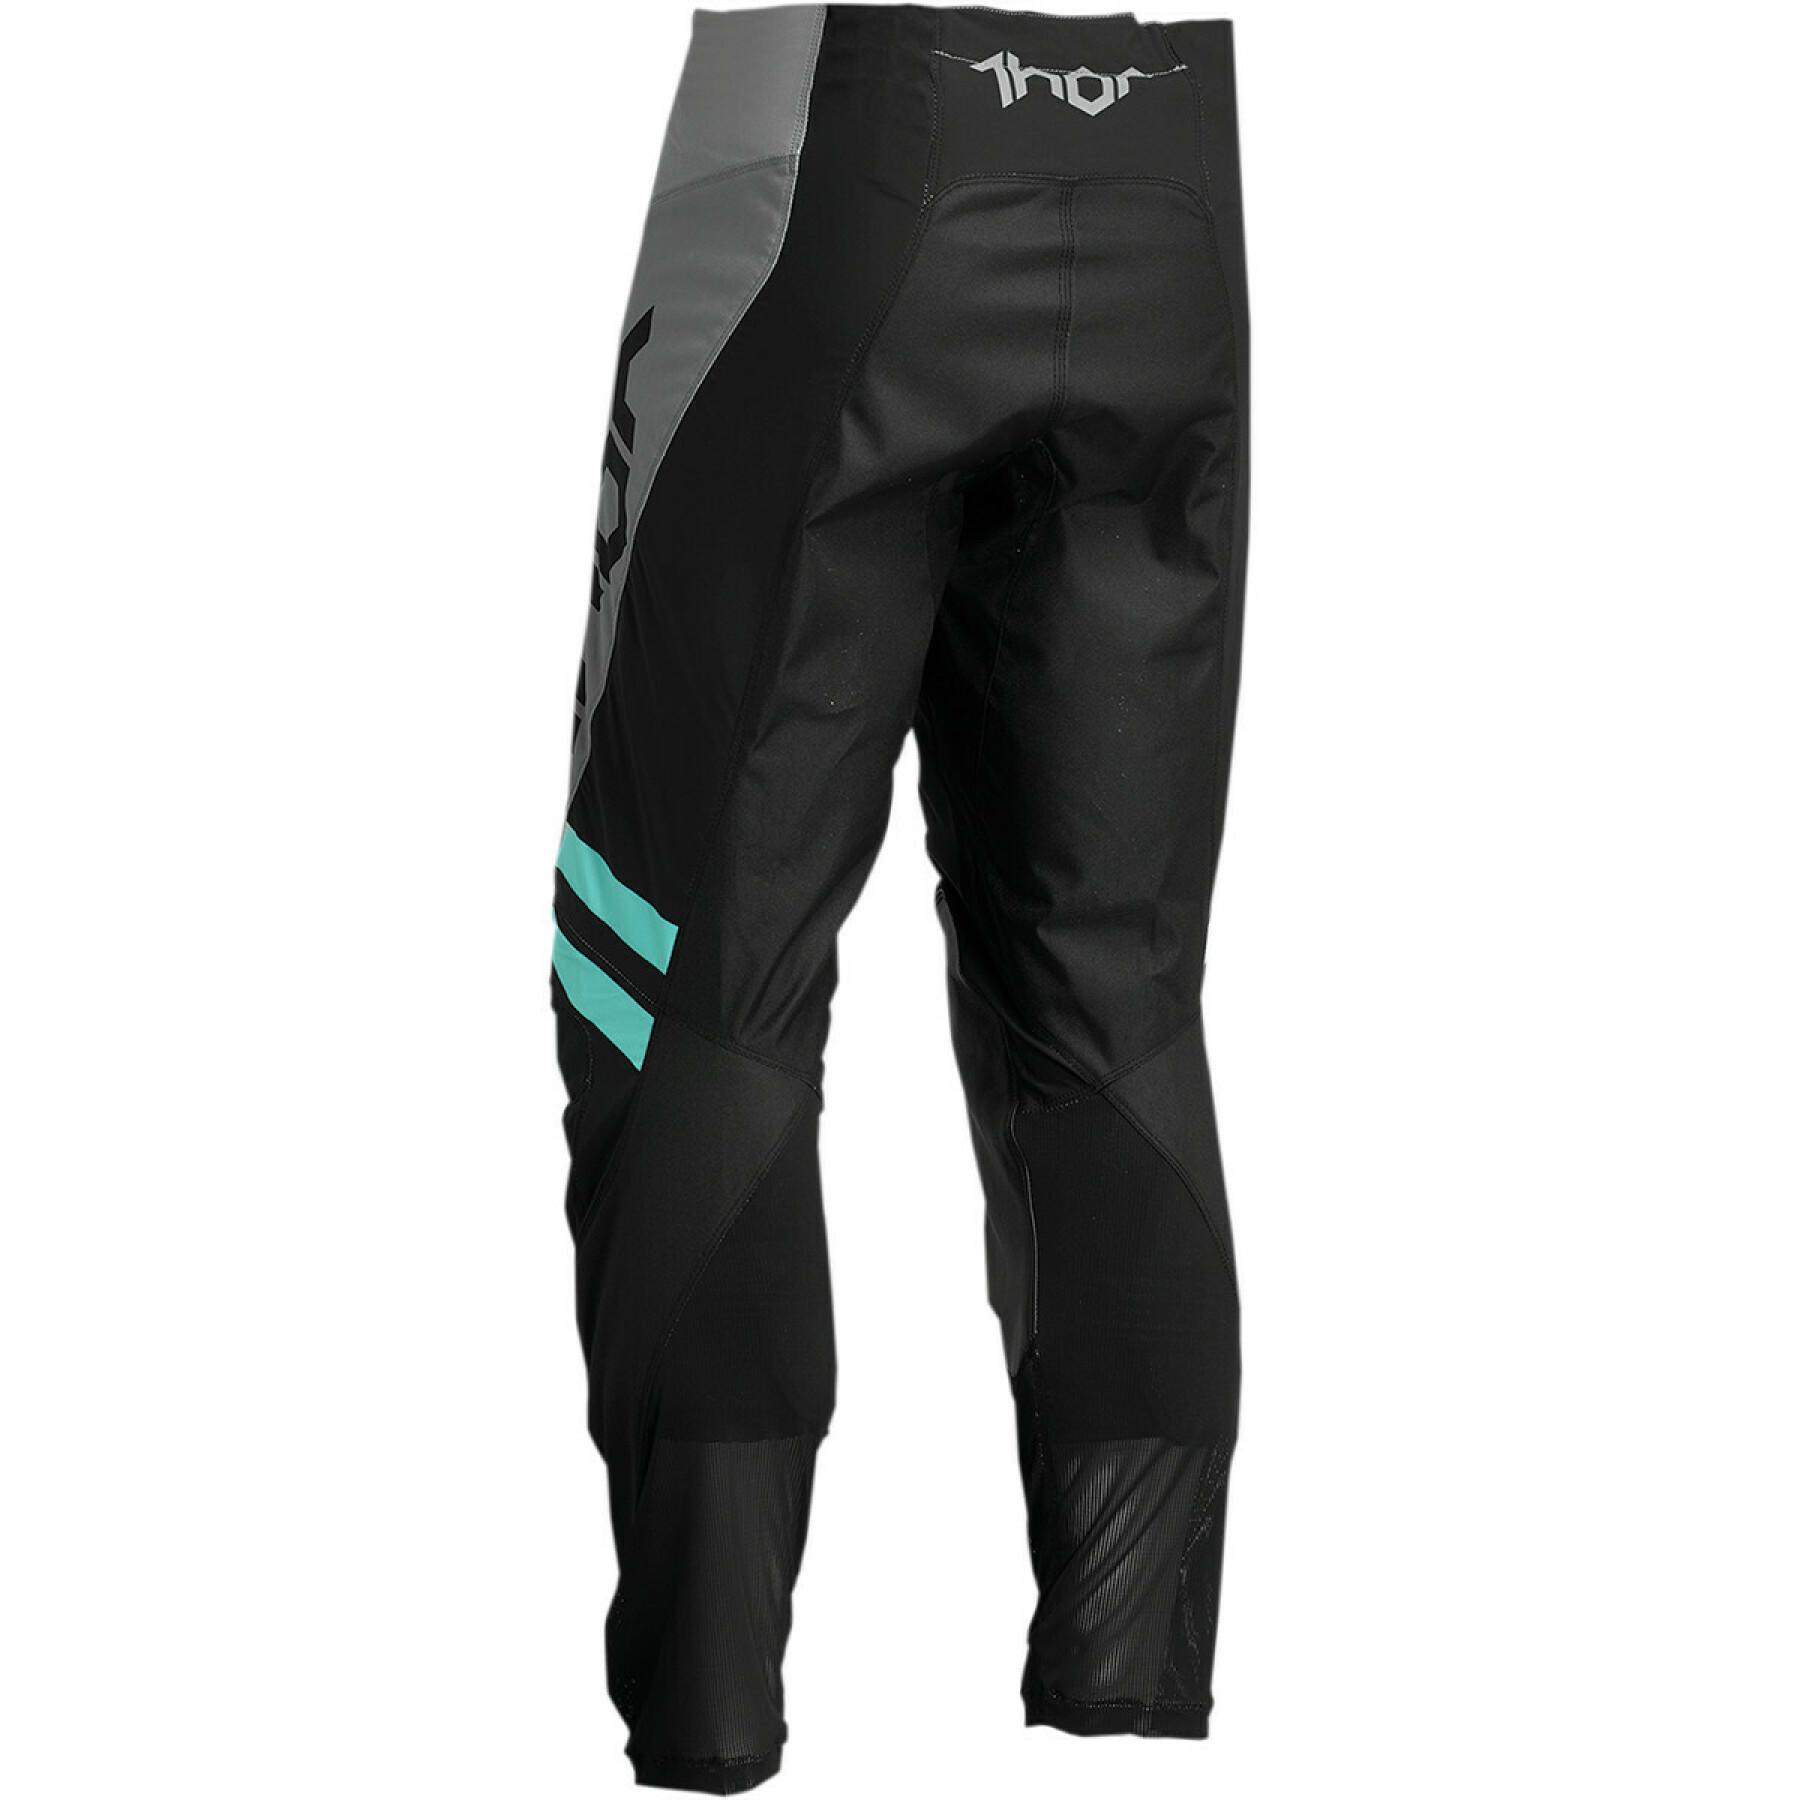 Child cross country pants Thor pulse cube